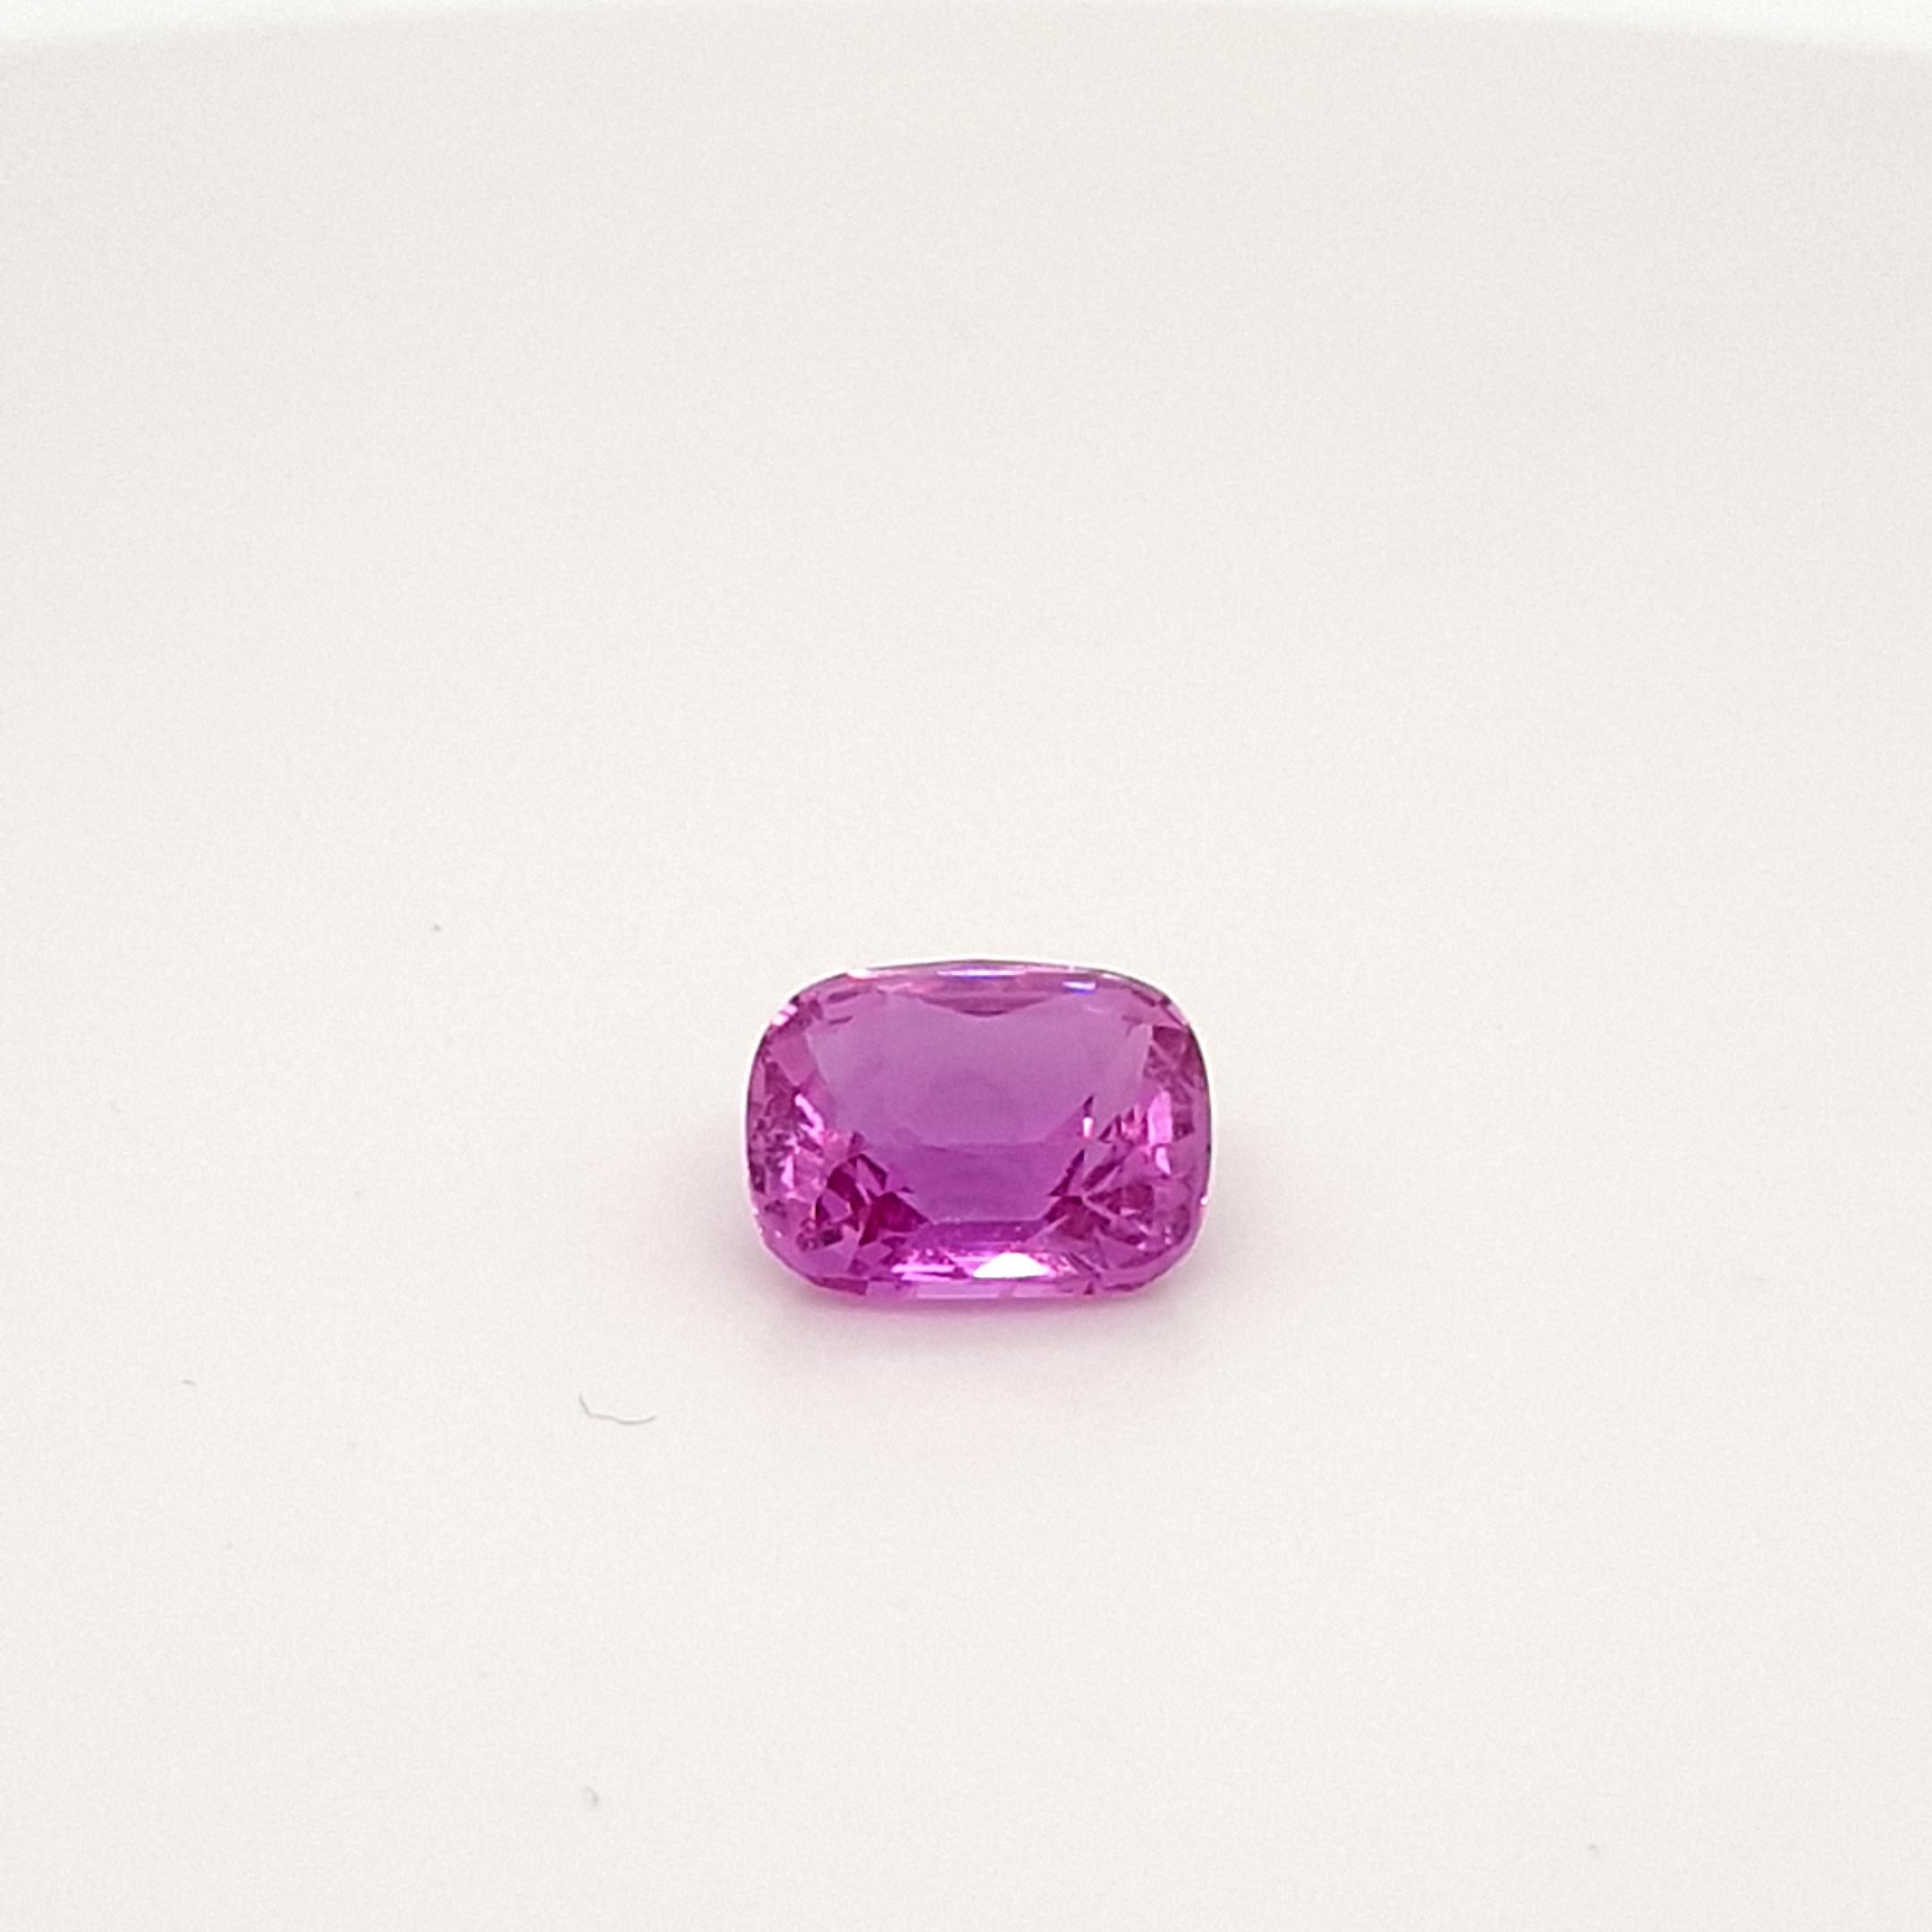 Pink Violet Sapphire, Faceted Gem, 3, 04 Ct., Loose Gemstone, no treatments For Sale 5